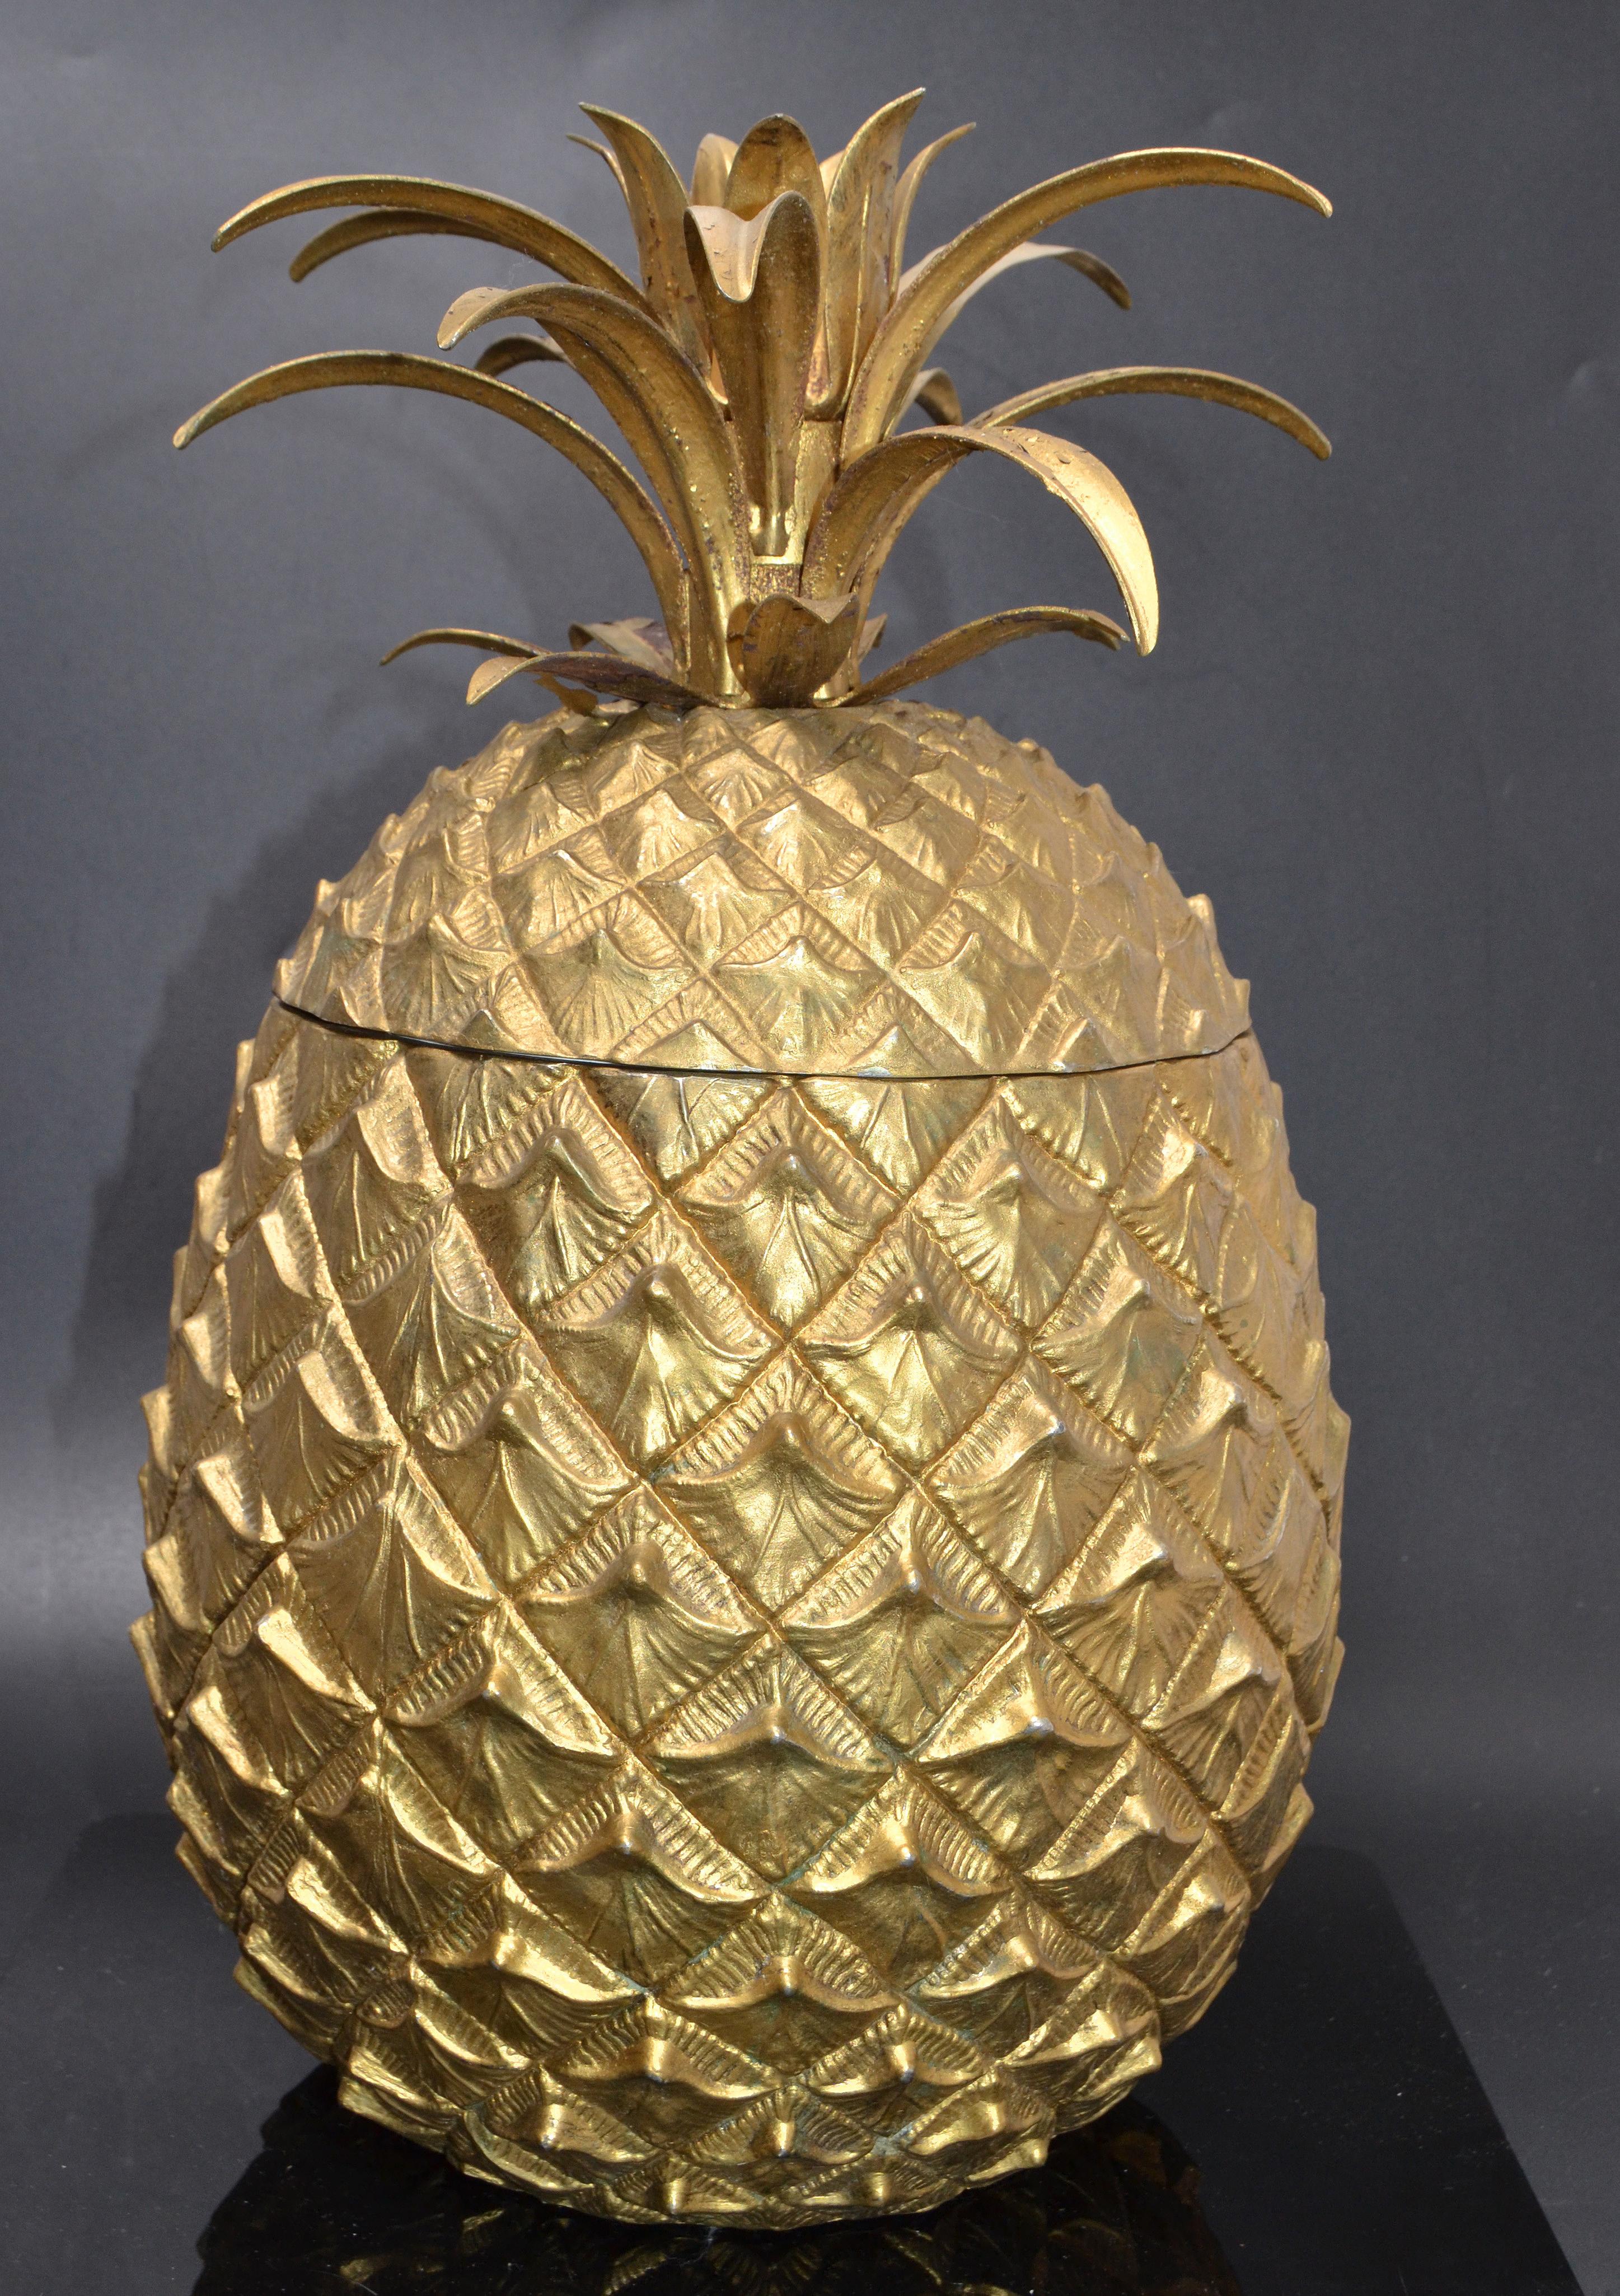 Original Mauro Manetti gold plate pineapple ice bucket with white plastic insulation, made in Italy.
This is the large one, not the regular size, very heavy.
Keeps the ice cubes frozen for a long time as the lid sits tight on the bucket.
Marked